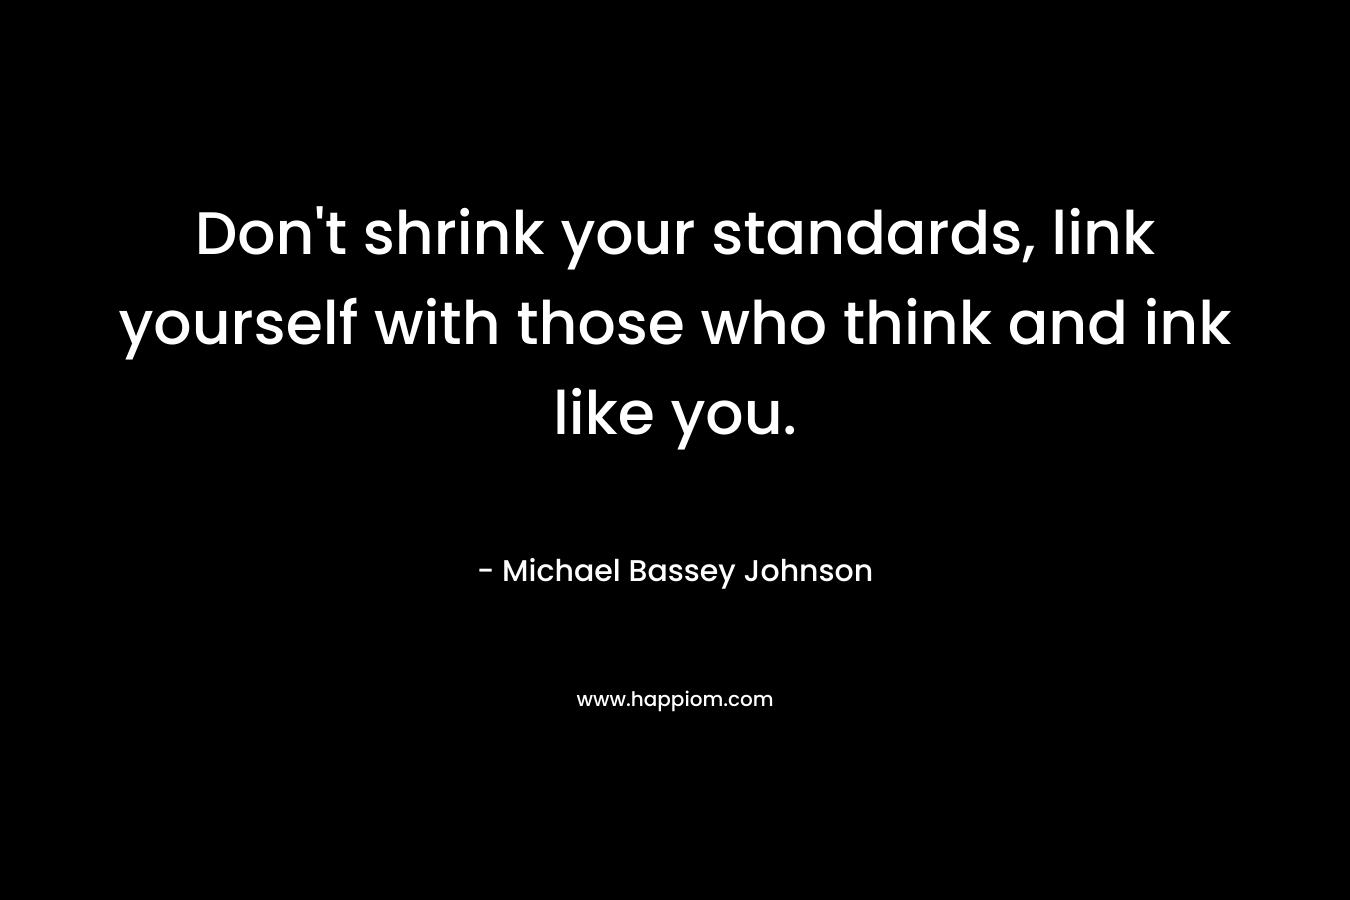 Don't shrink your standards, link yourself with those who think and ink like you.